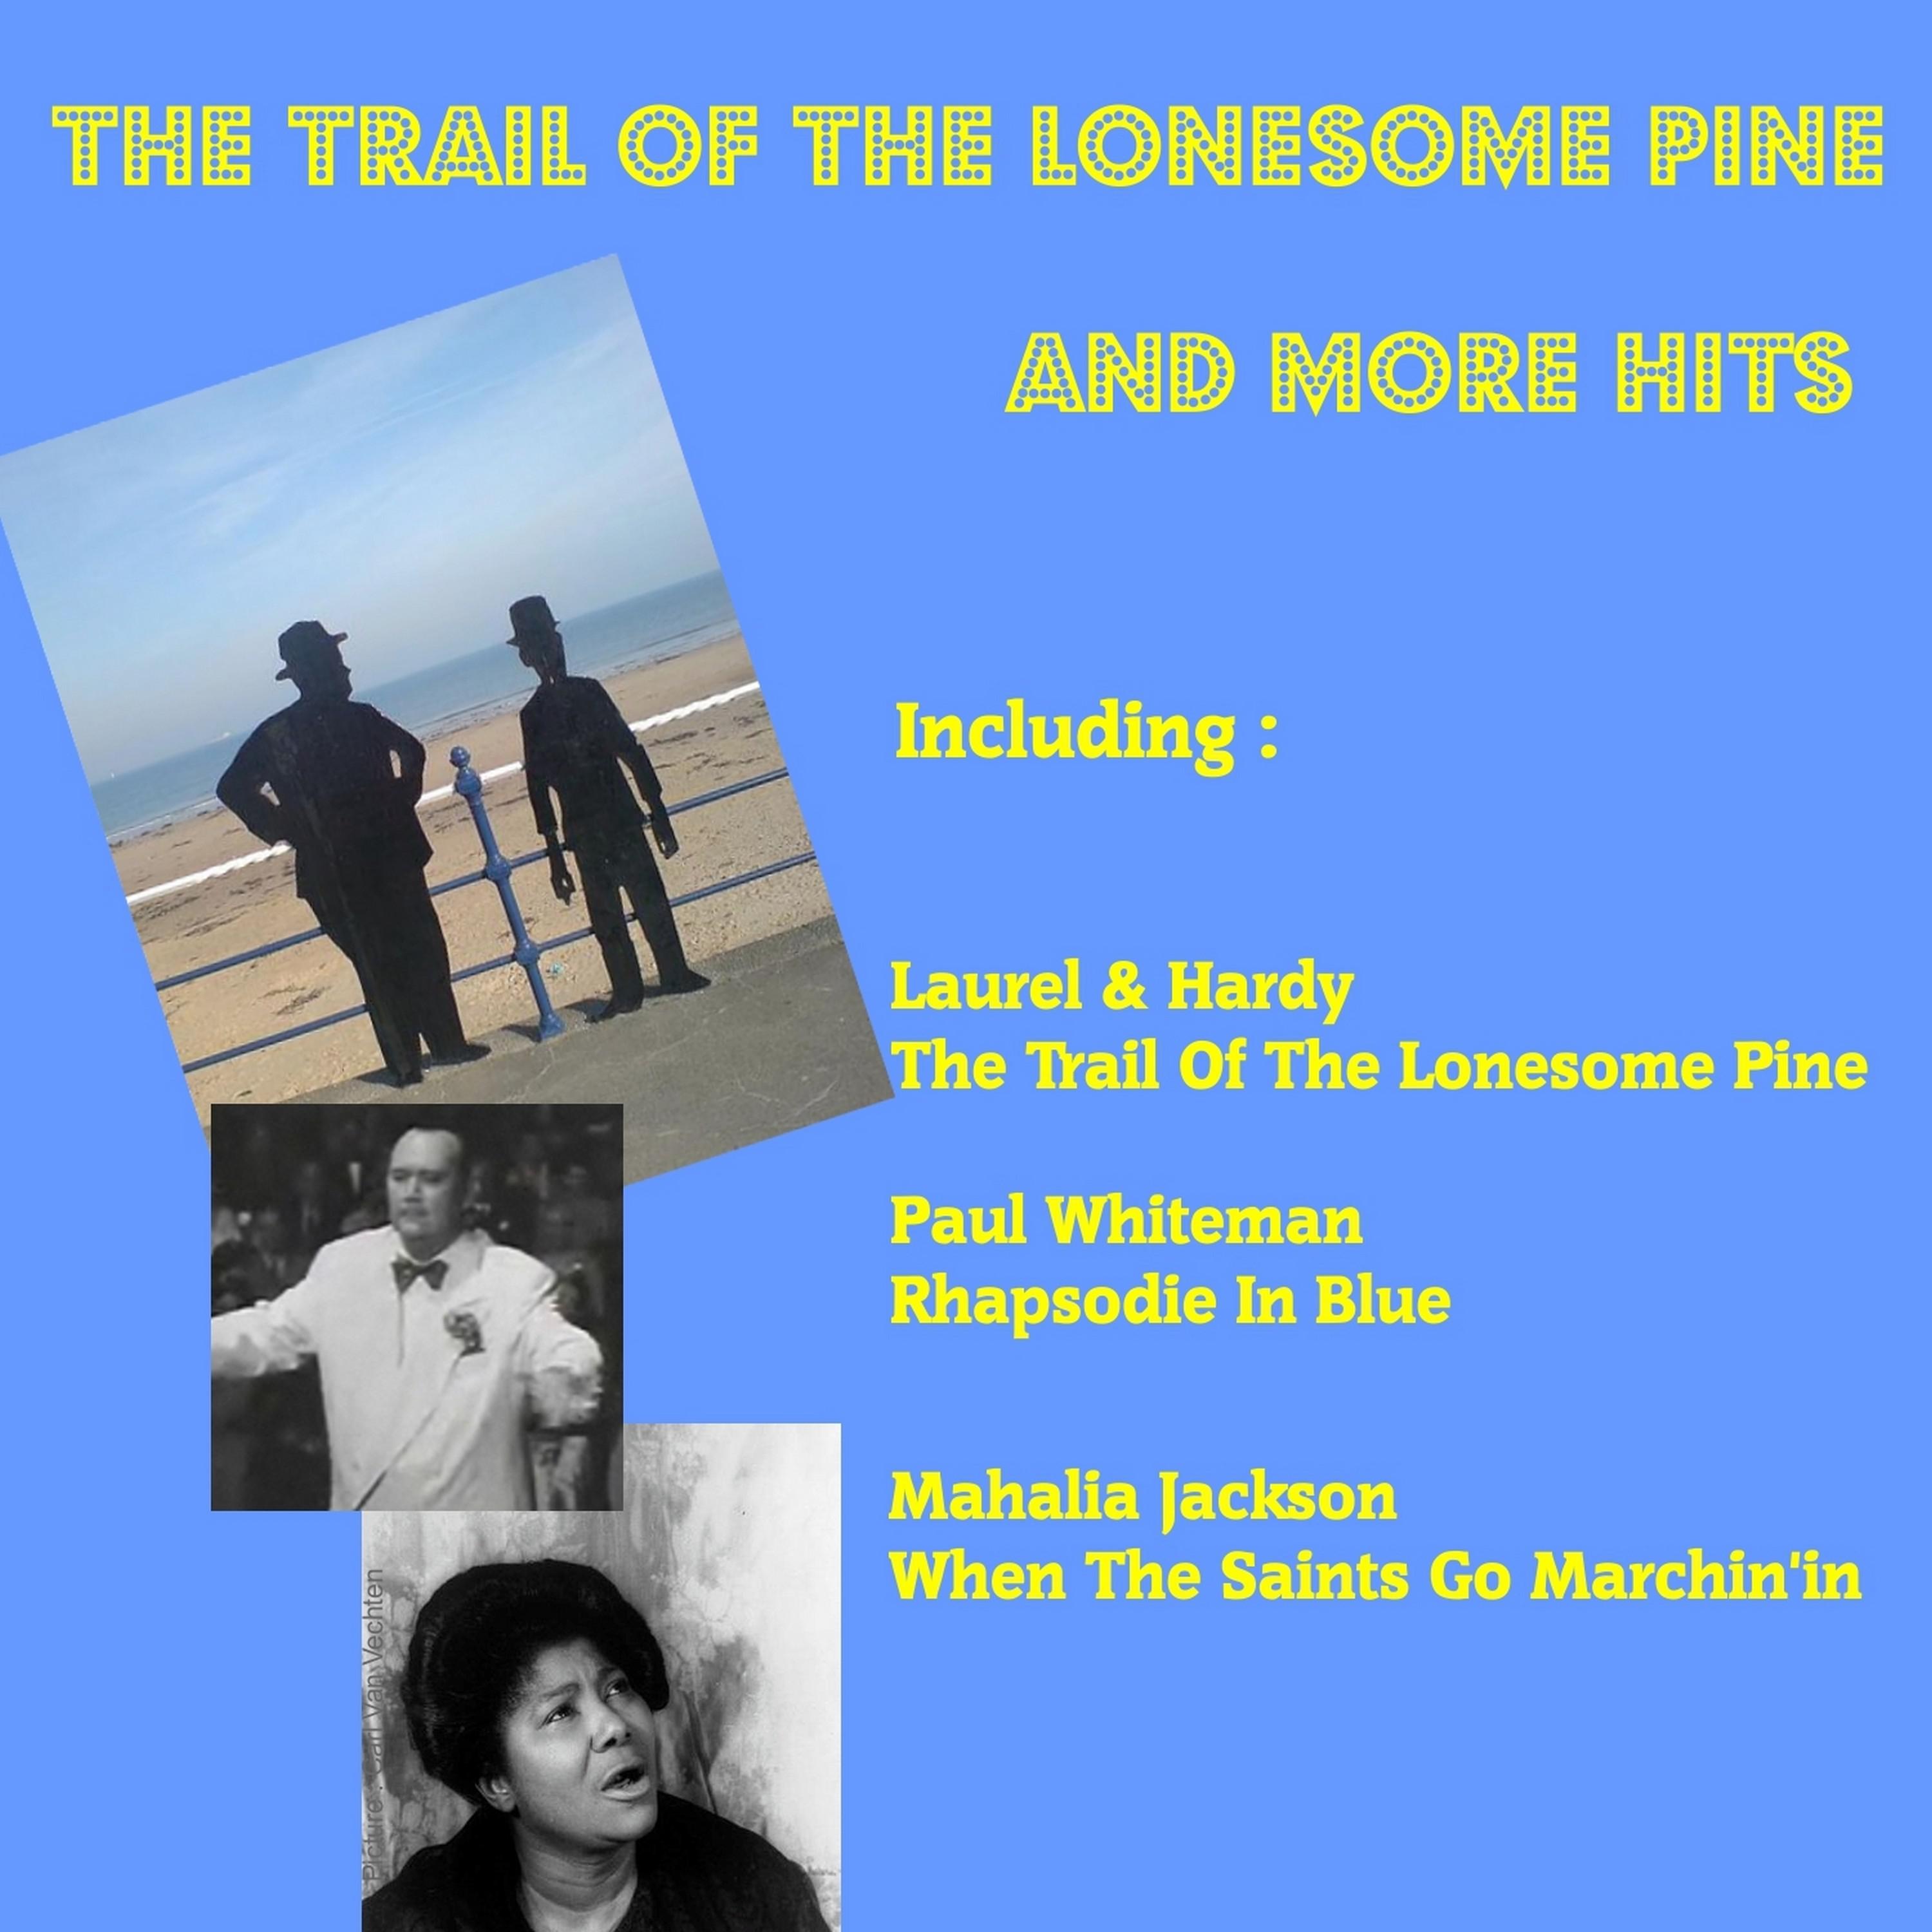 The Trail of the Lonesone Pine and More Hits